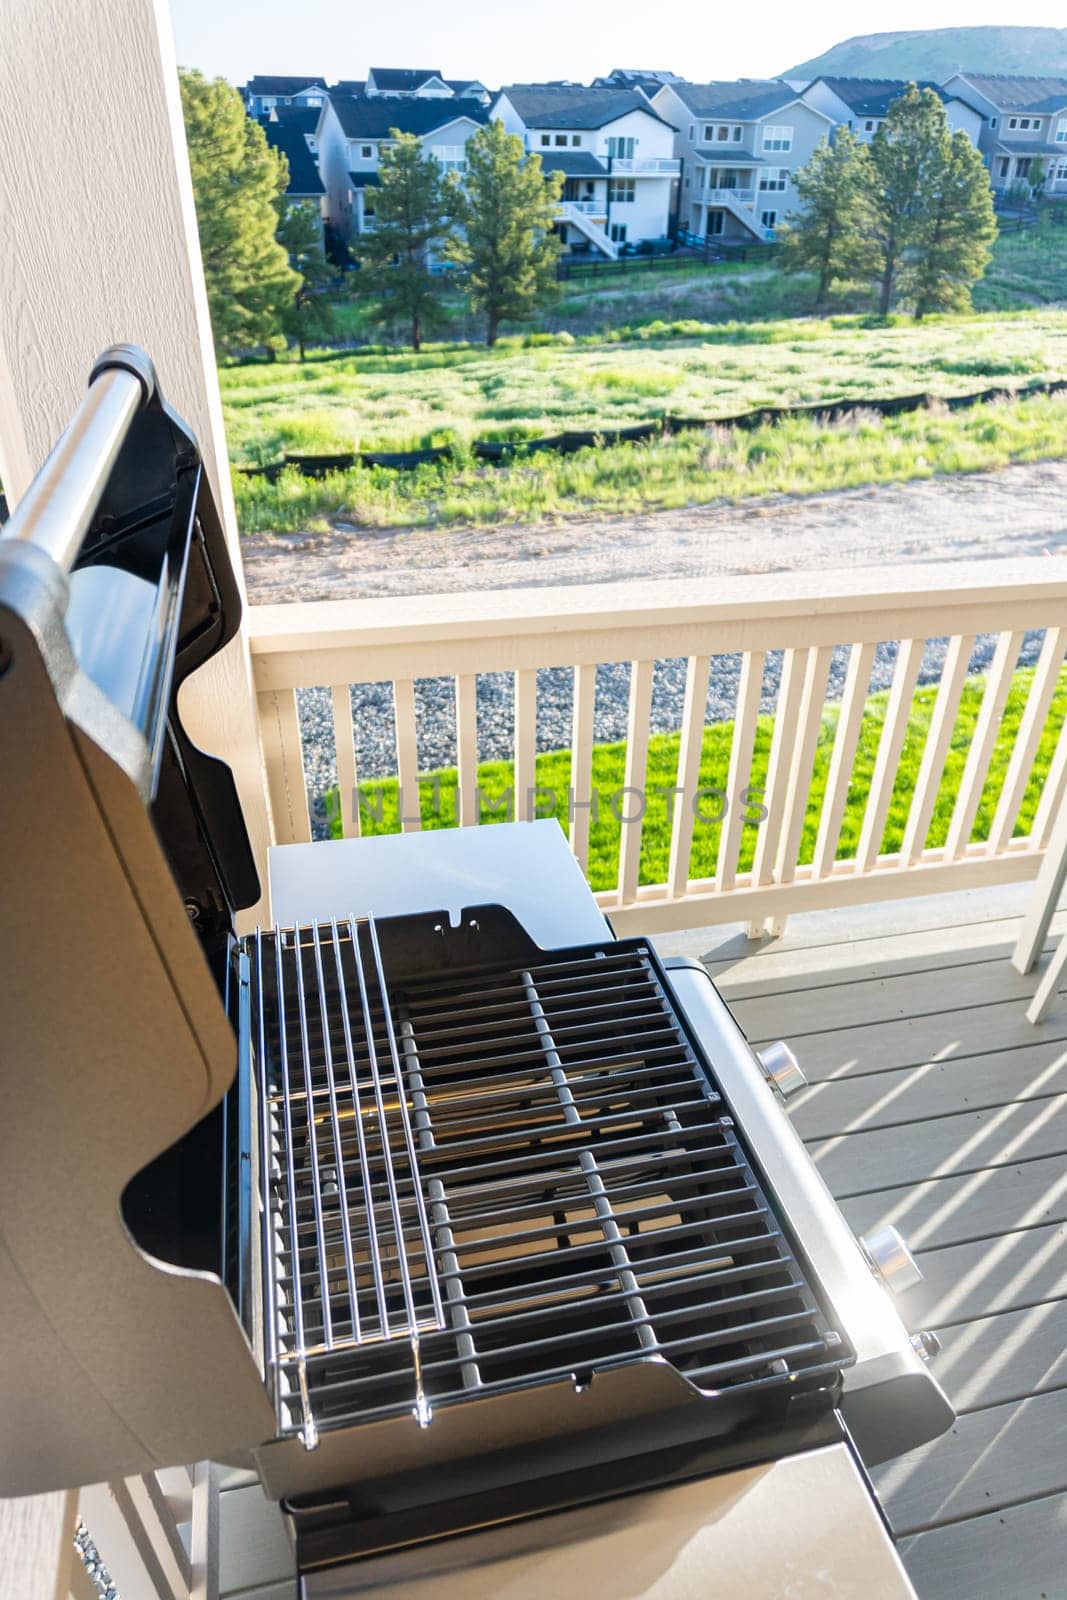 Sleek, open-lid, two-burner grill stands ready for use, conveniently positioned on the balcony of a suburban home, promising a delightful alfresco cooking experience.